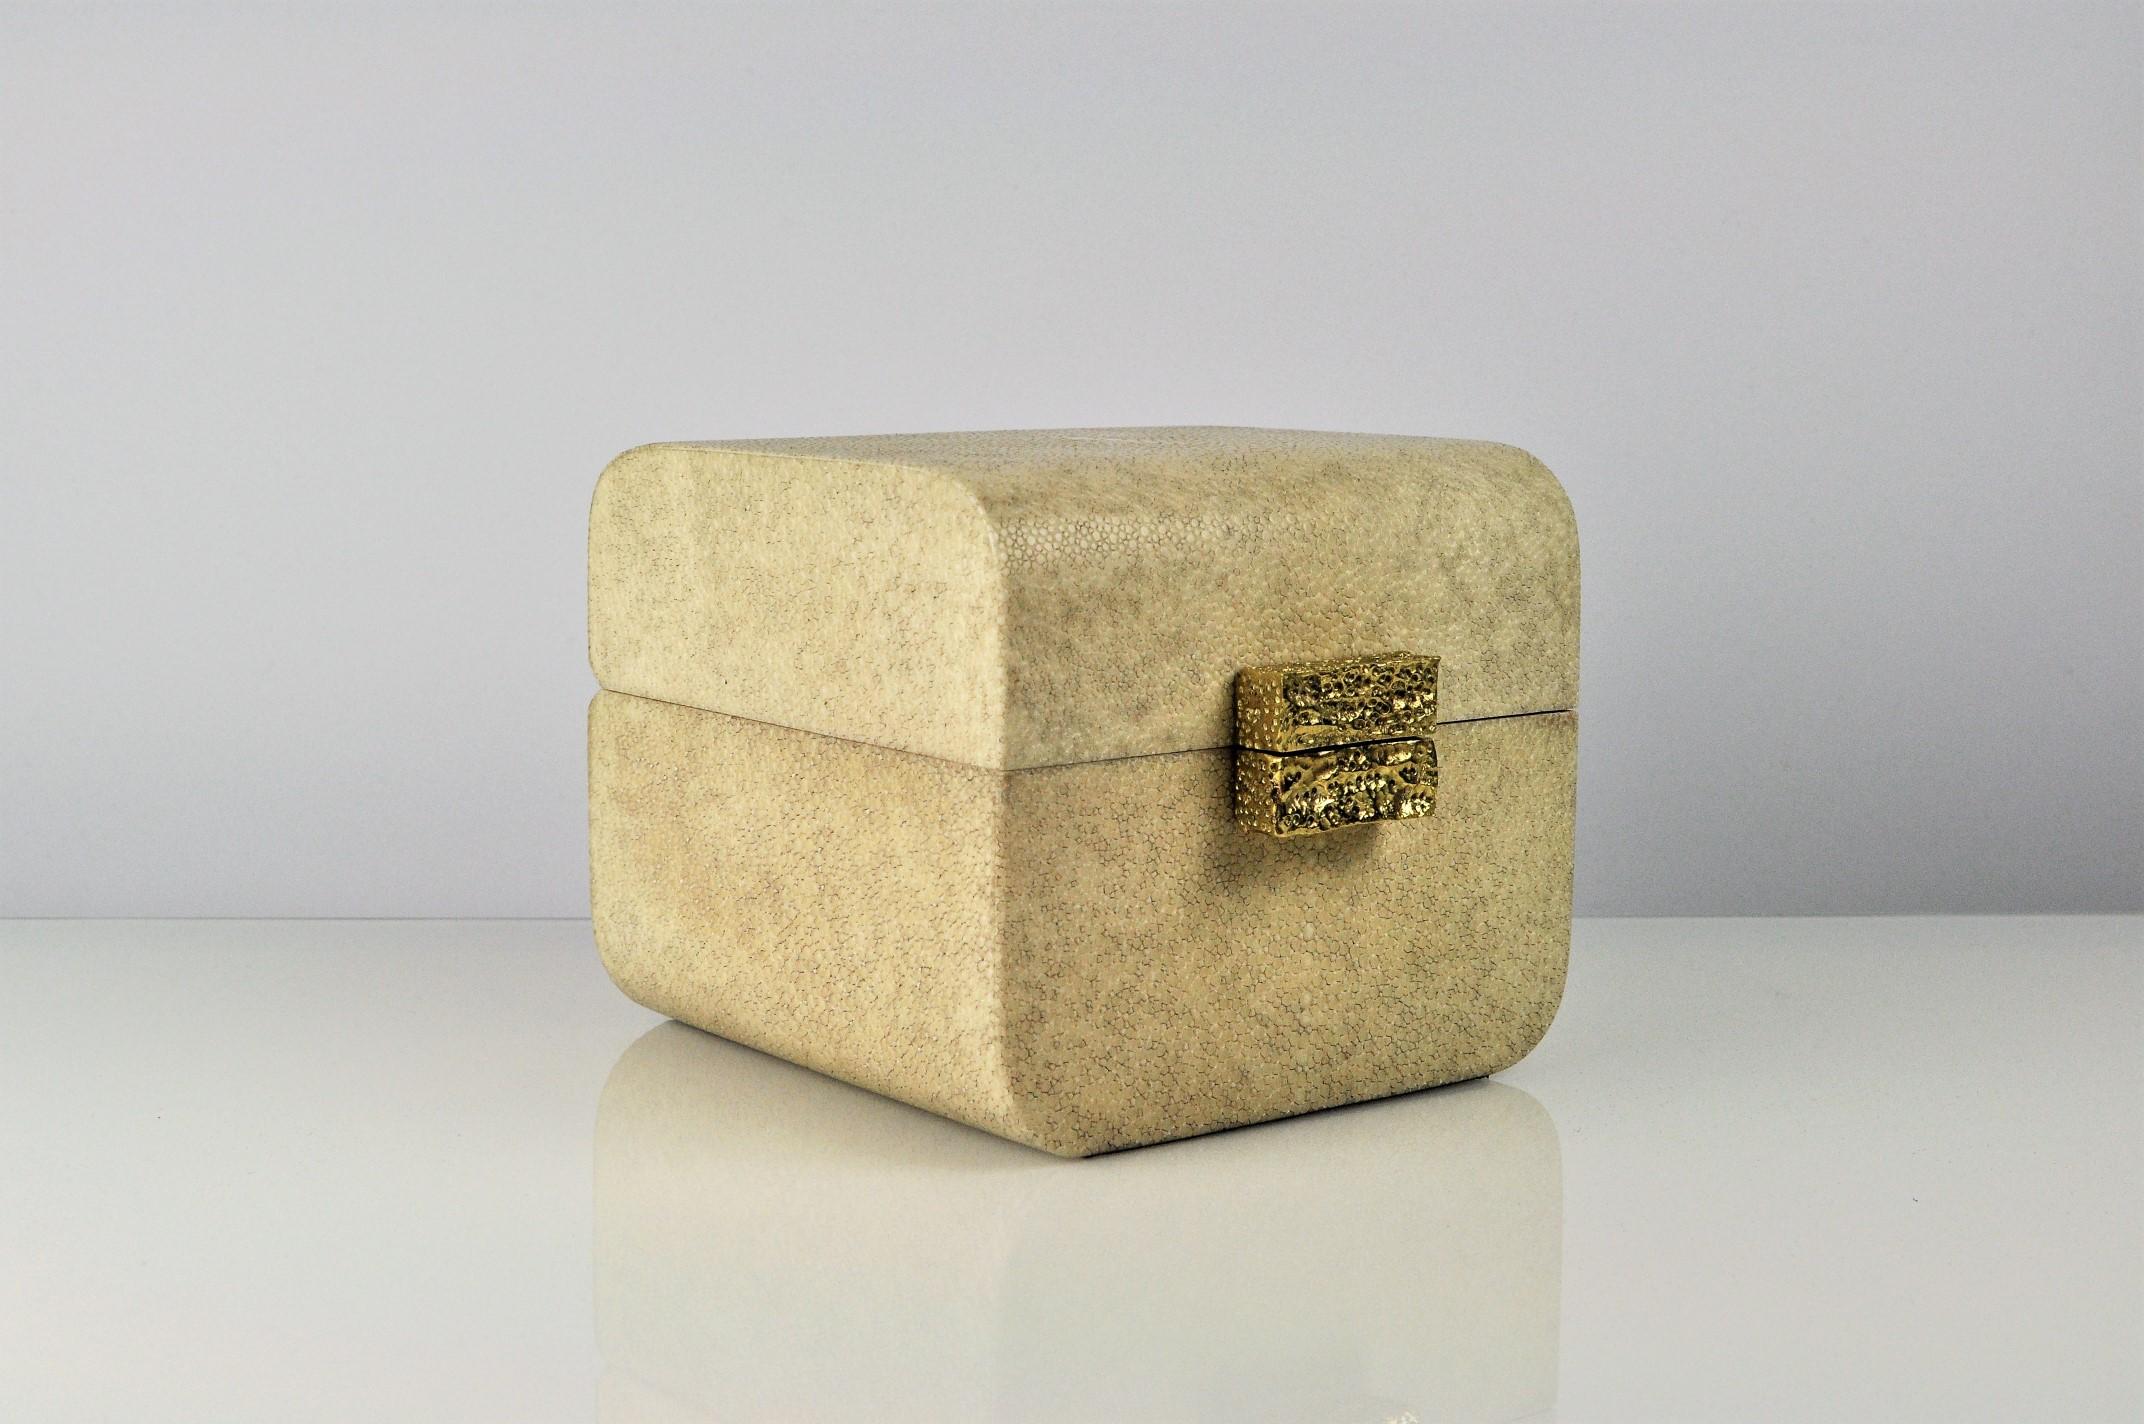 shagreen box with lid